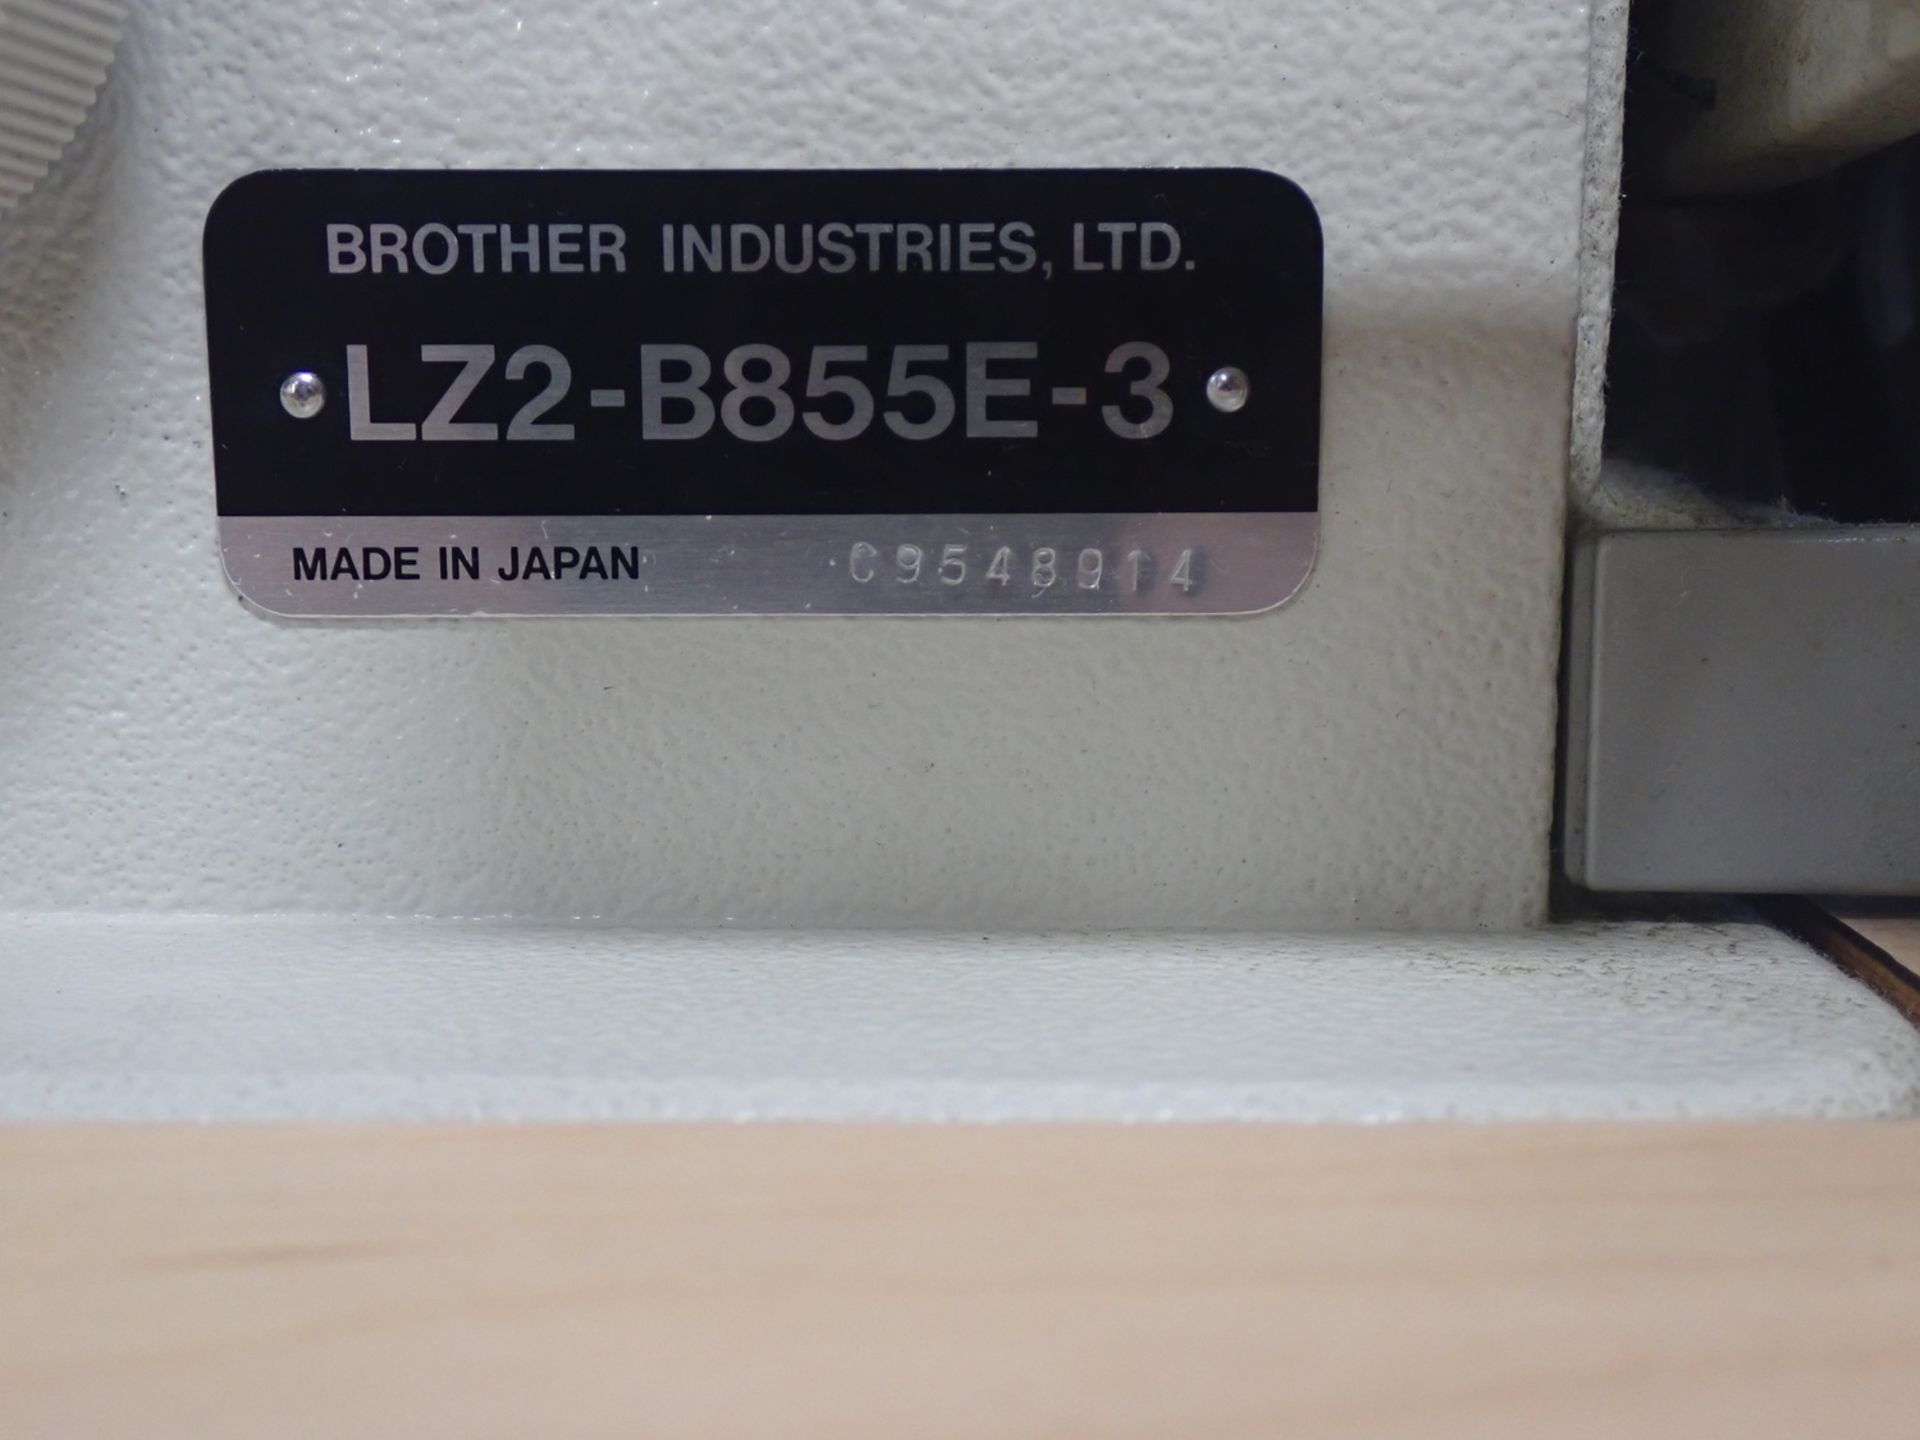 BROTHER LZ2-B855E-3 EMBROIDERY MACHINE , S/N C9548914 W/ BROTHER EZ-855 CONTROLLER (110V) - Image 2 of 9